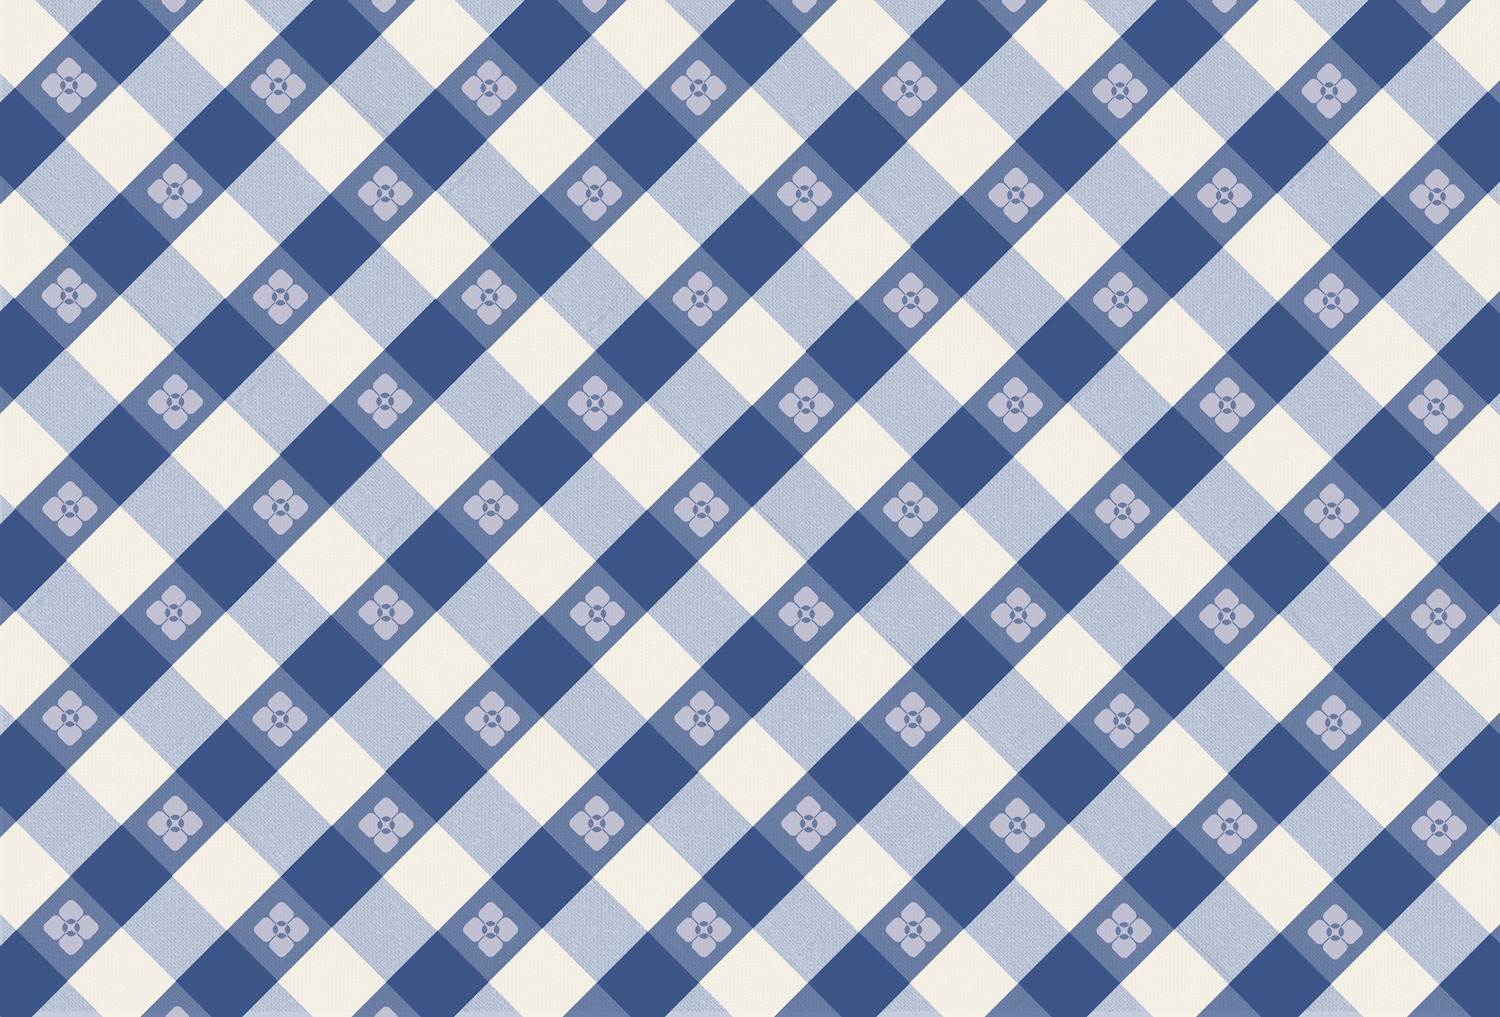 A picnic table-inspired design featuring a blue diagonal gingham pattern with floral accents on a white background, high-resolution.